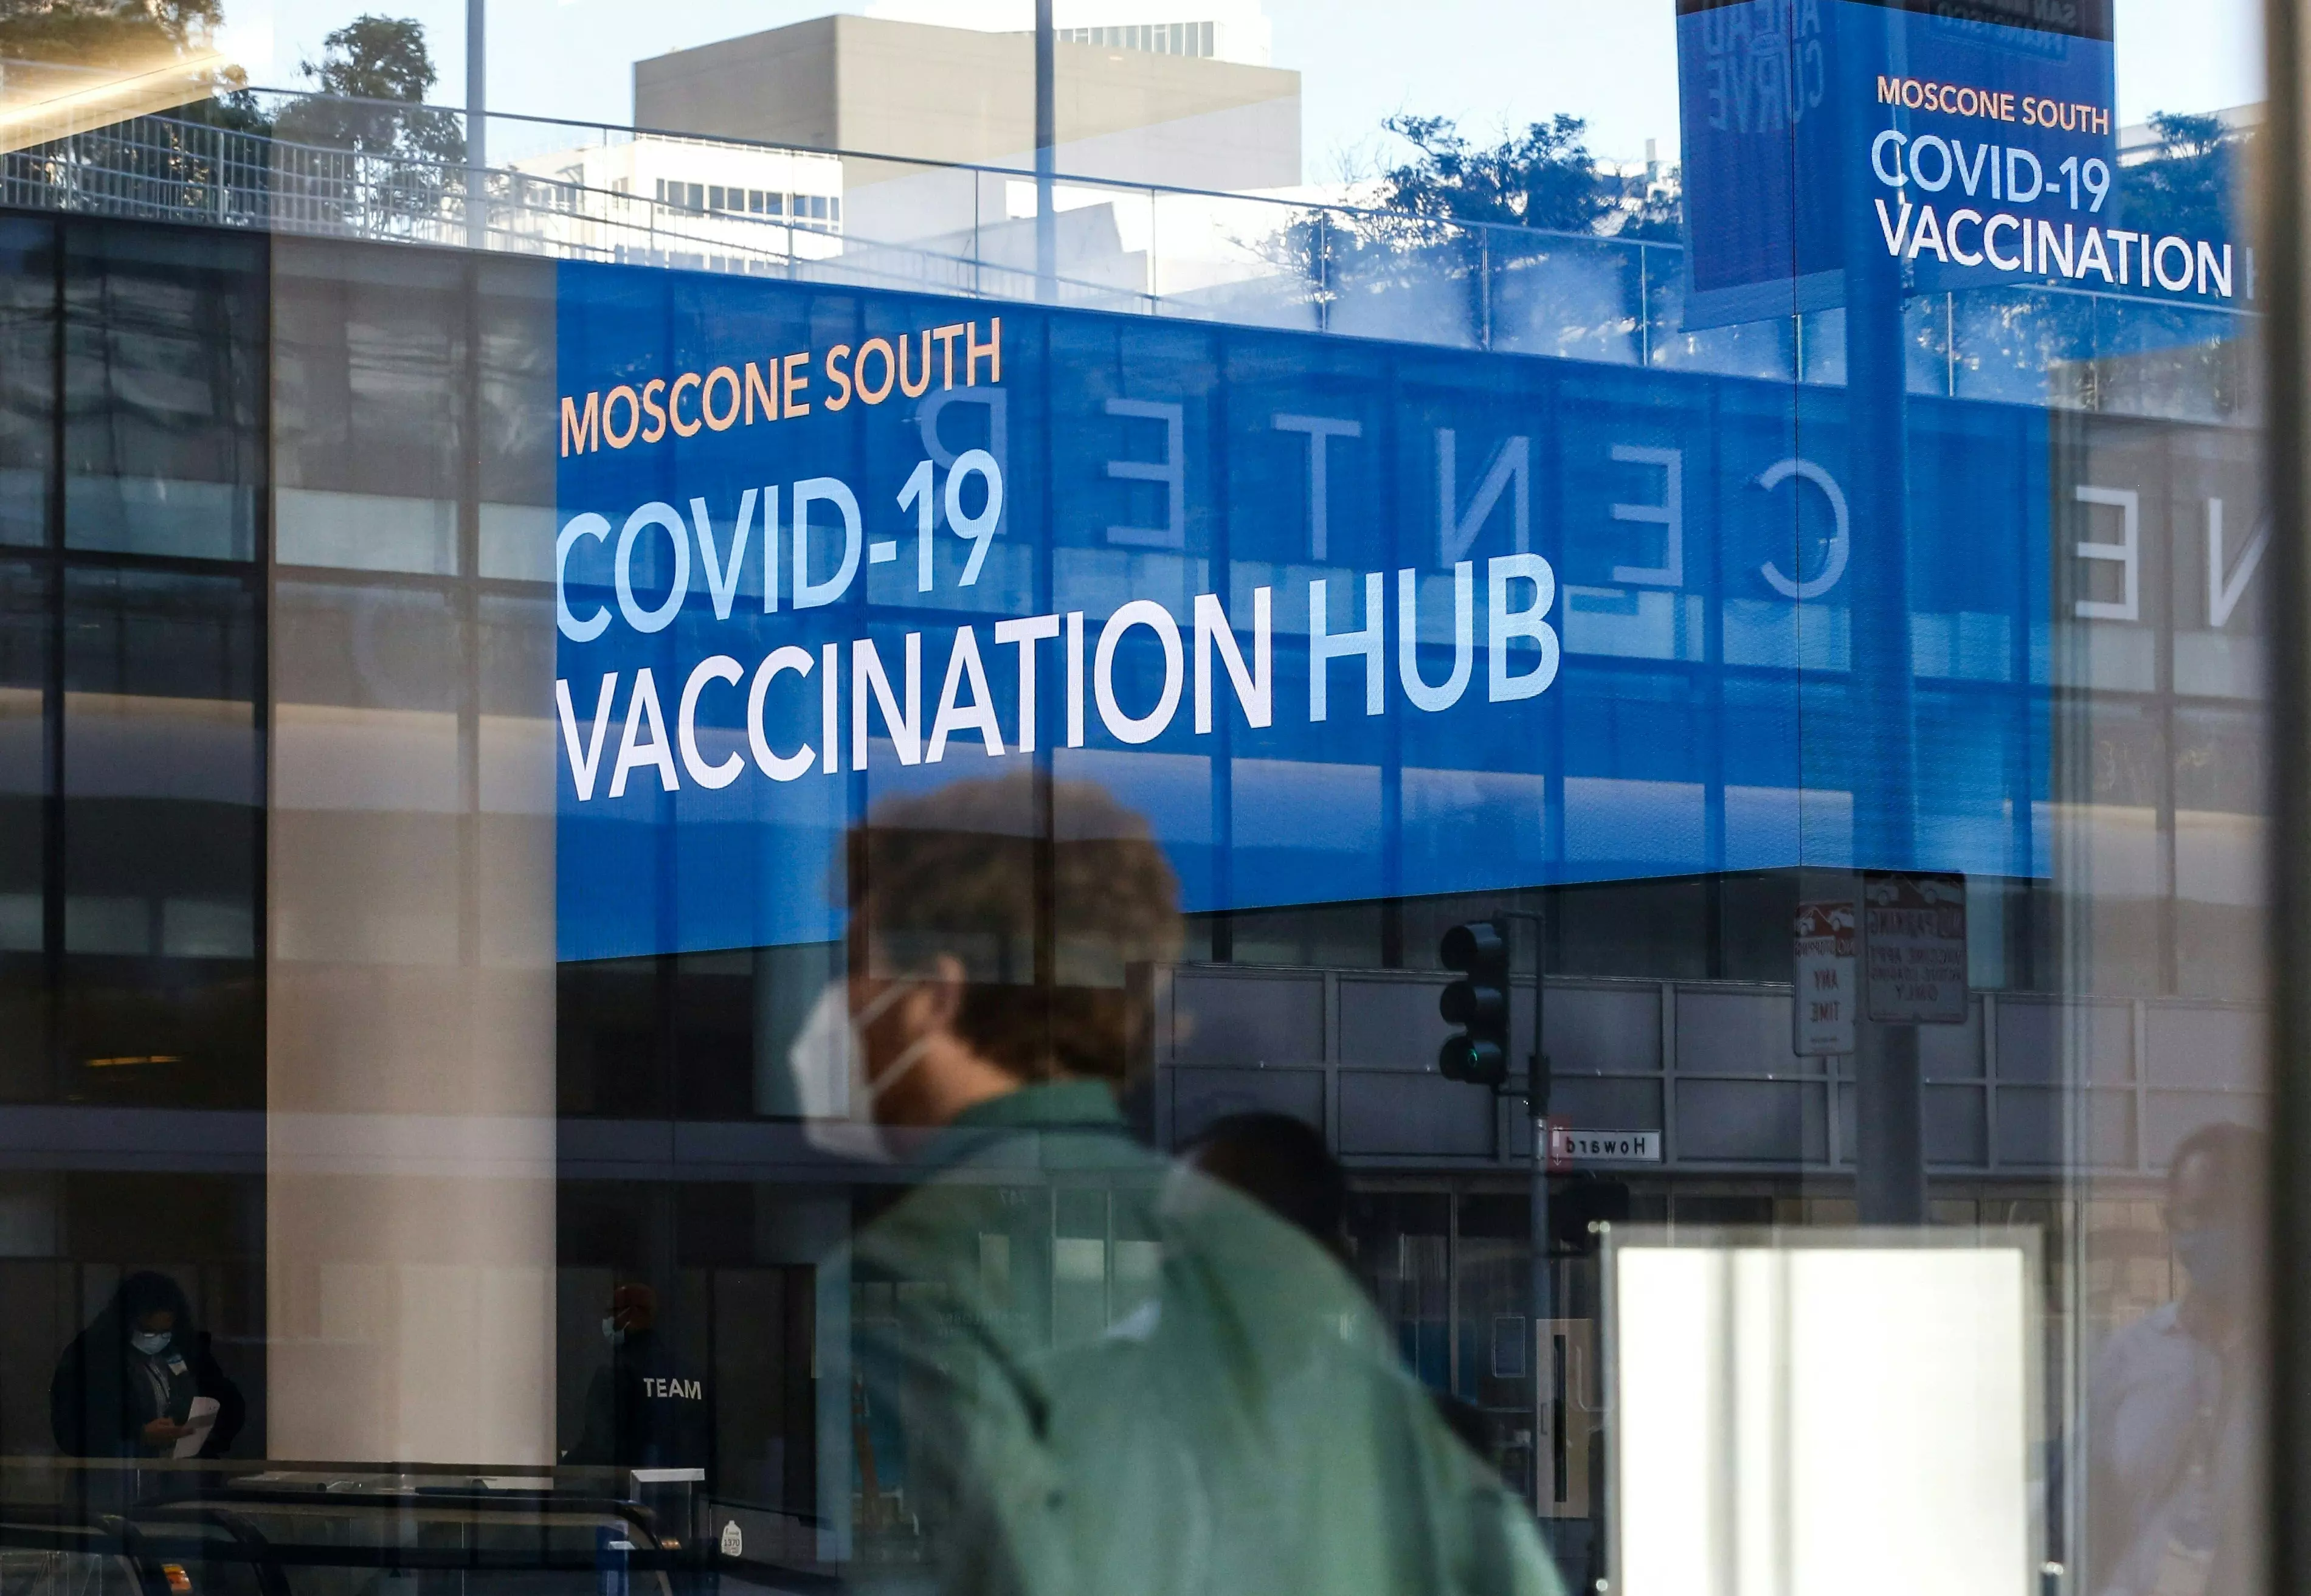 Morphed Covid-19 Vaccine Sign Shared As Call For Child Organ Donations